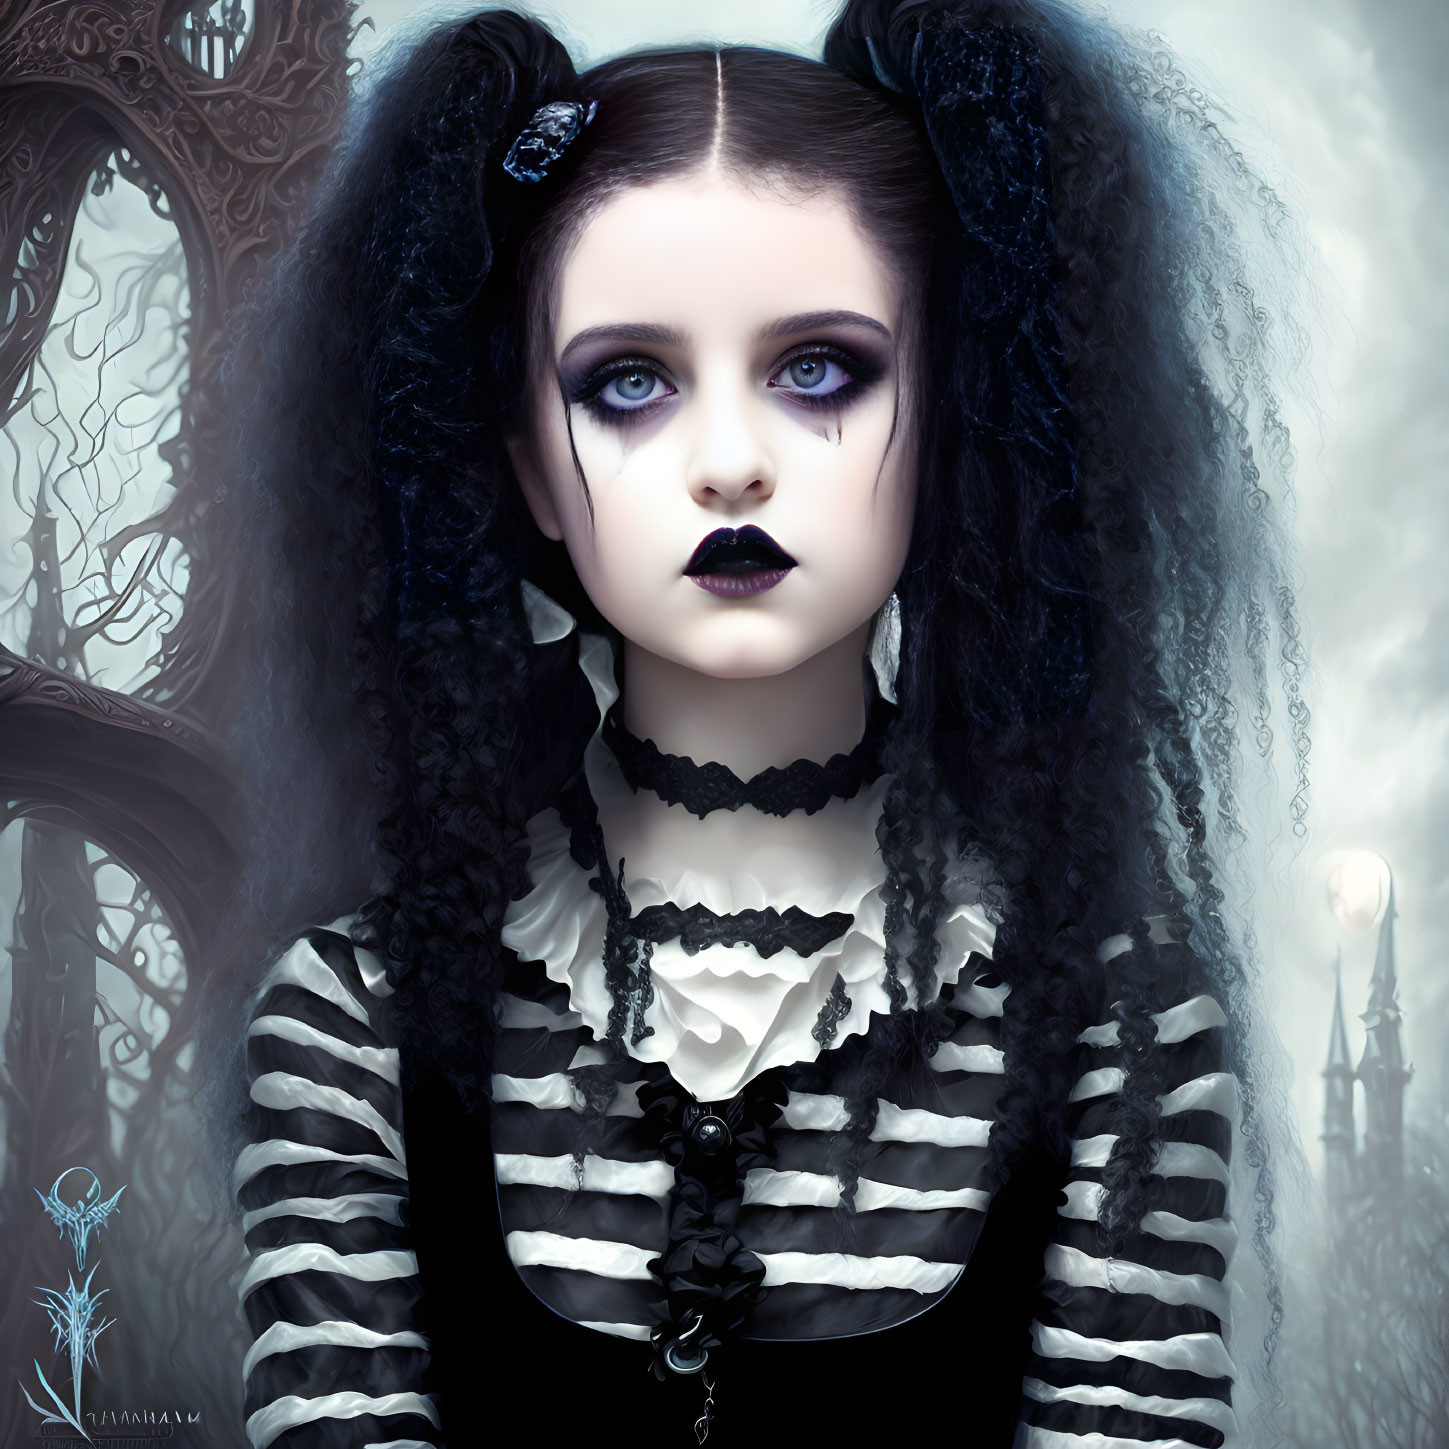 Pale-skinned gothic woman in striped dress with dark lipstick and black hair